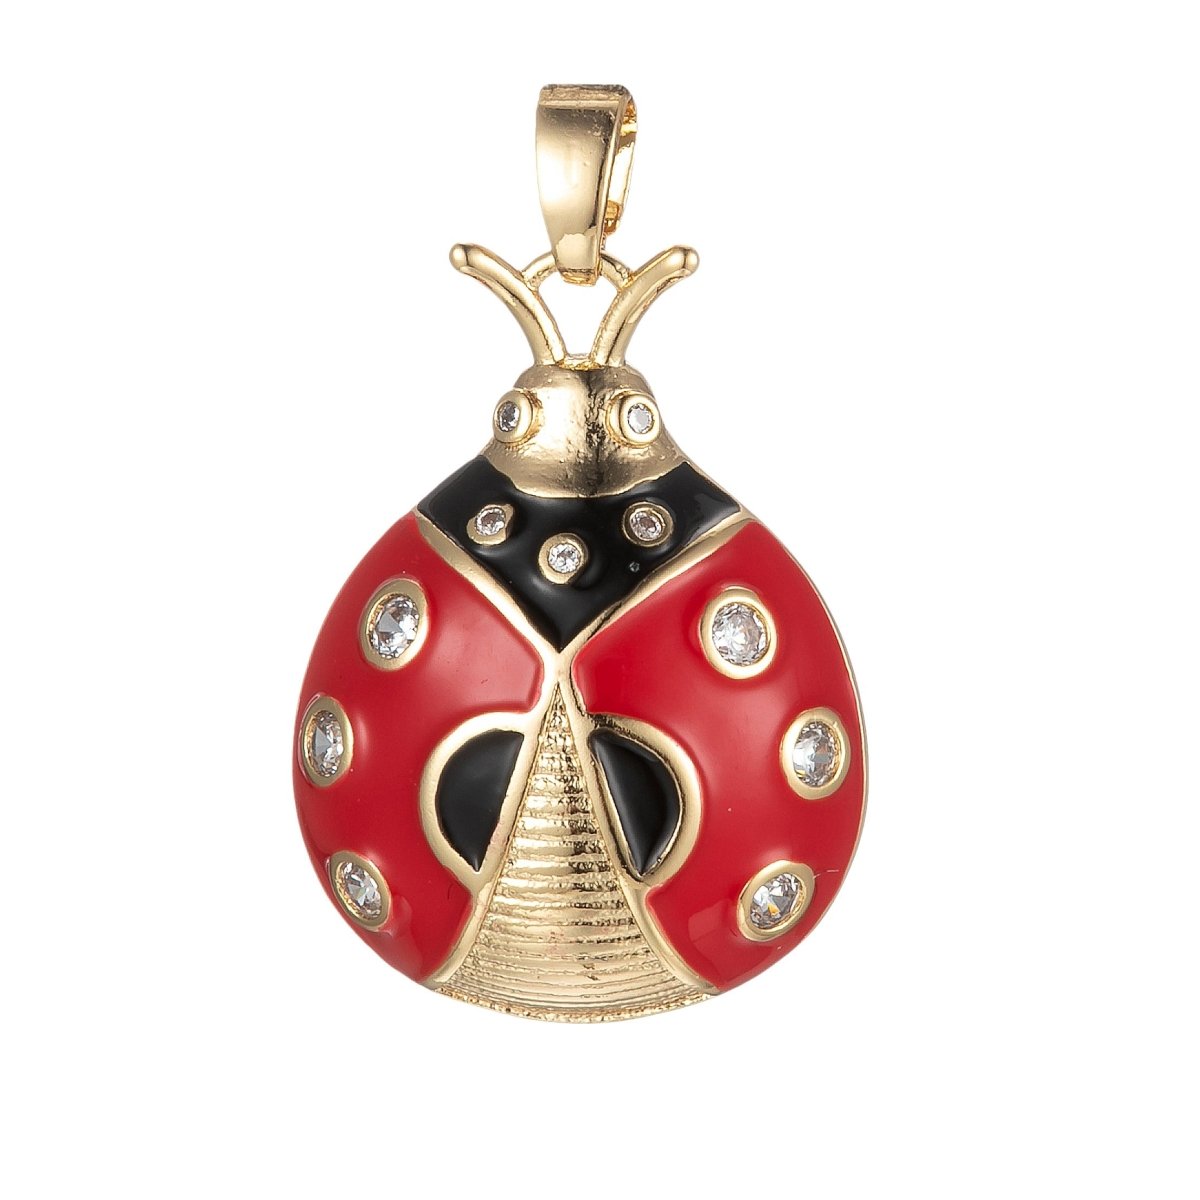 Dainty Red Lady Bug Charm Enamel Animal Insect Pendant for Bracelet Necklace Earring H-900 - DLUXCA